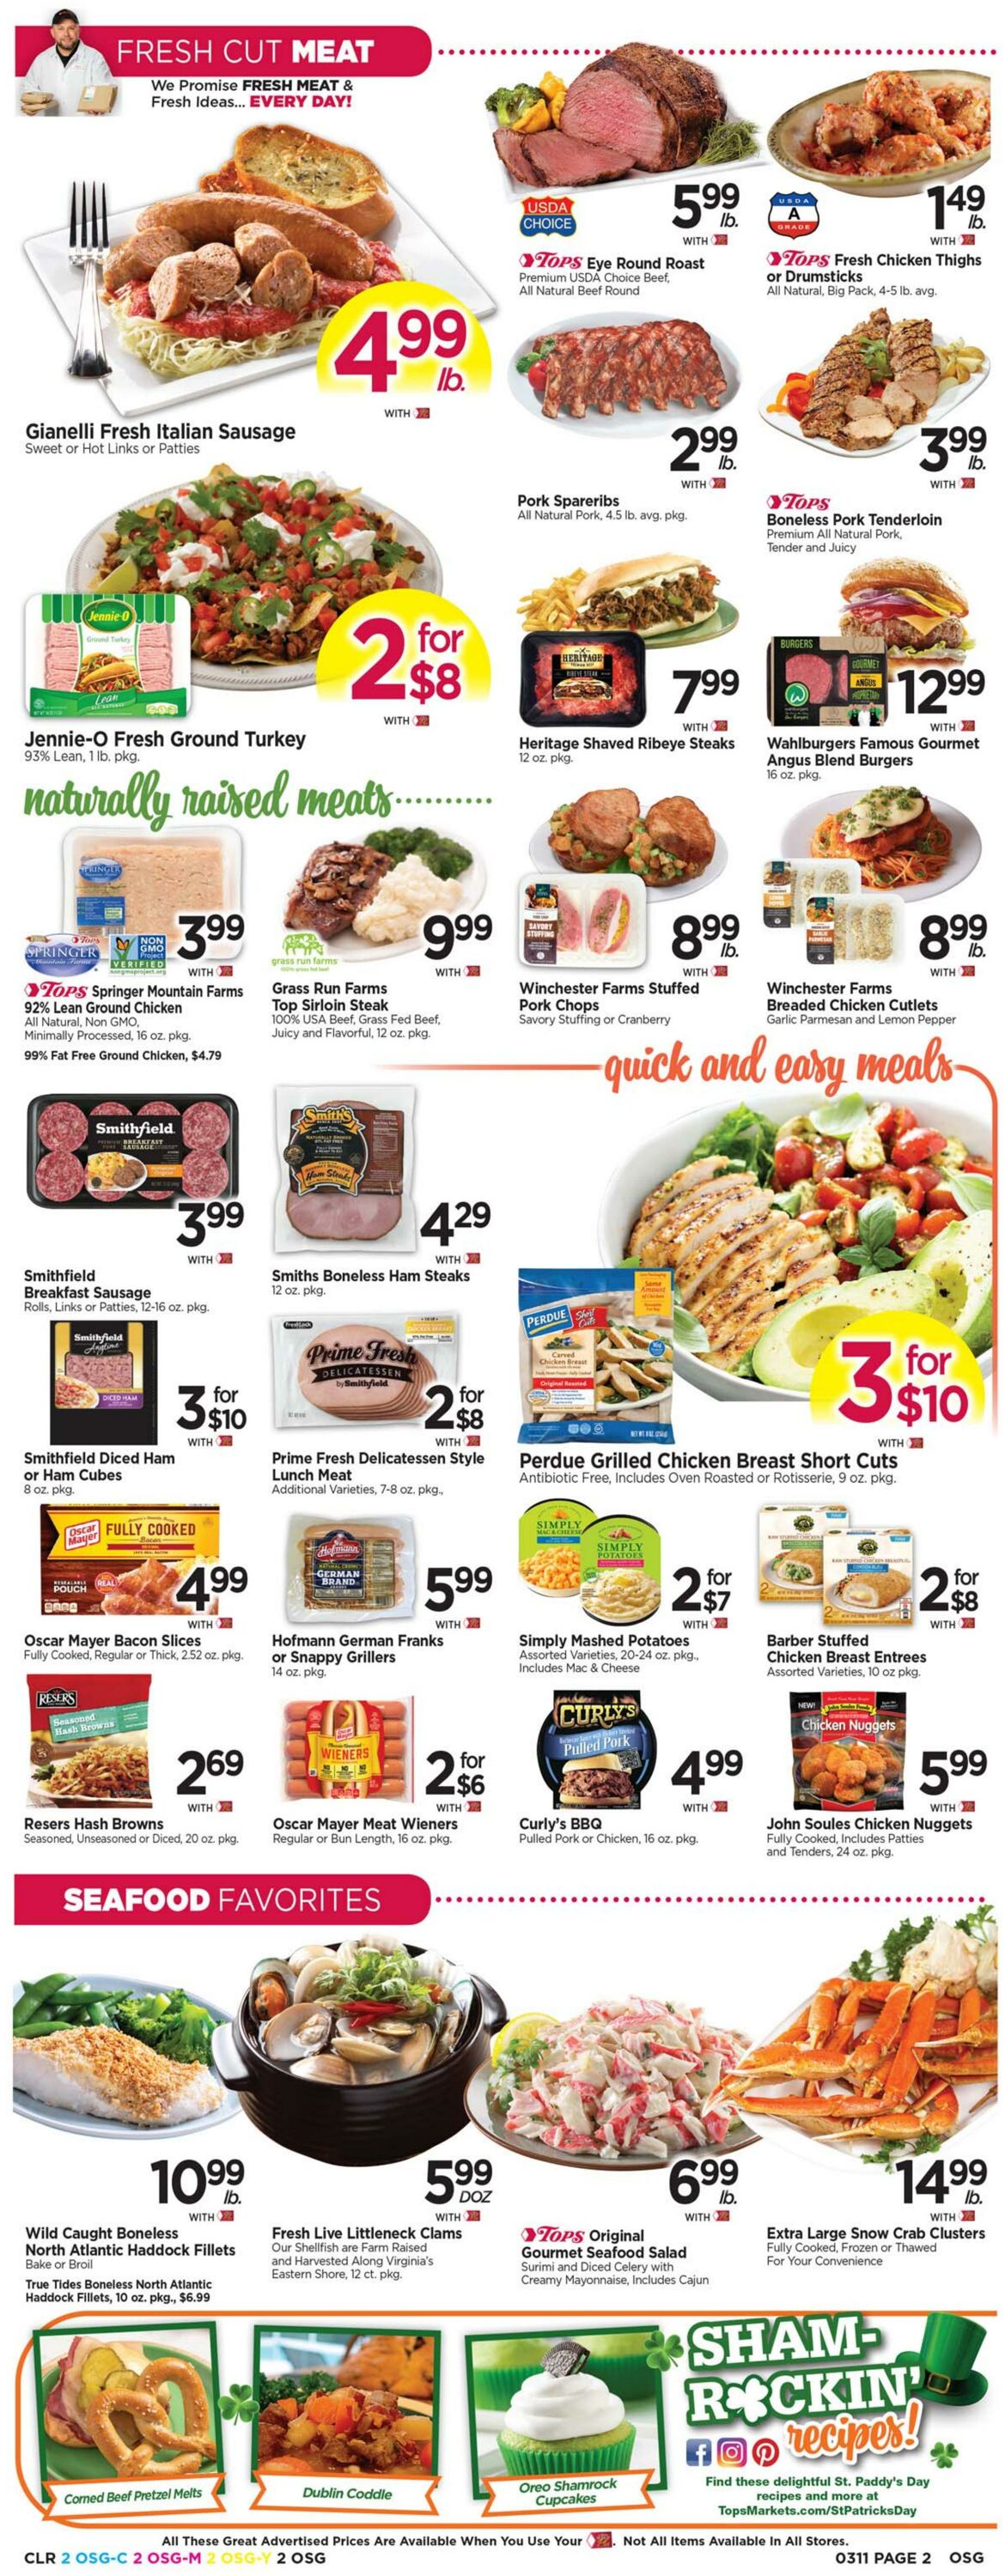 Weekly ad Tops Friendly Markets 03/05/2023 - 03/11/2023